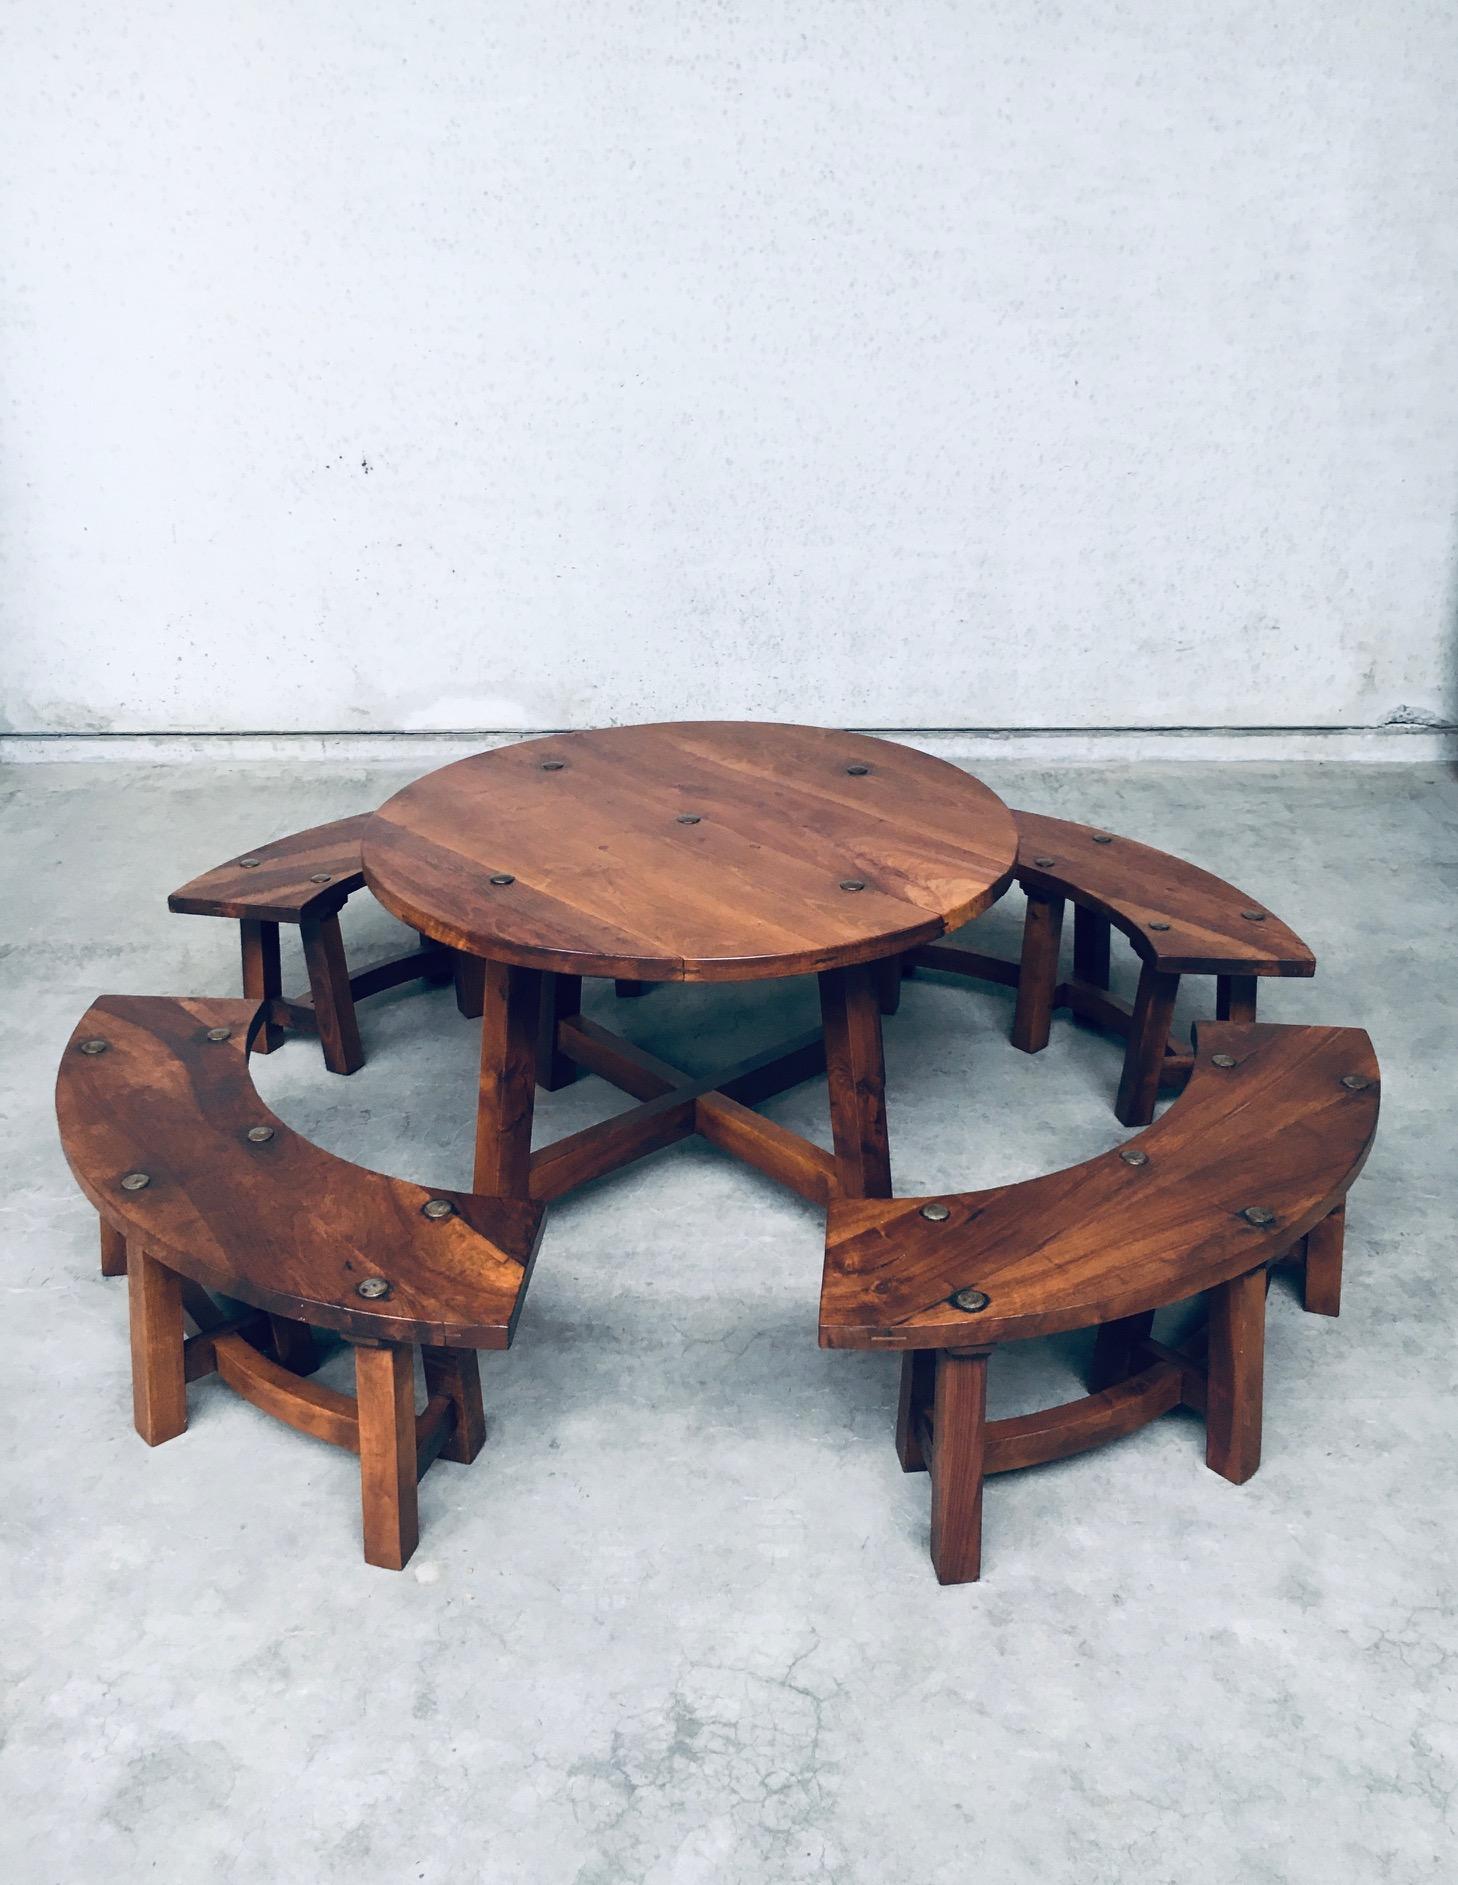 Midcentury French Alps Chalet Style Round Table & 4 Benches, France 1950's 1